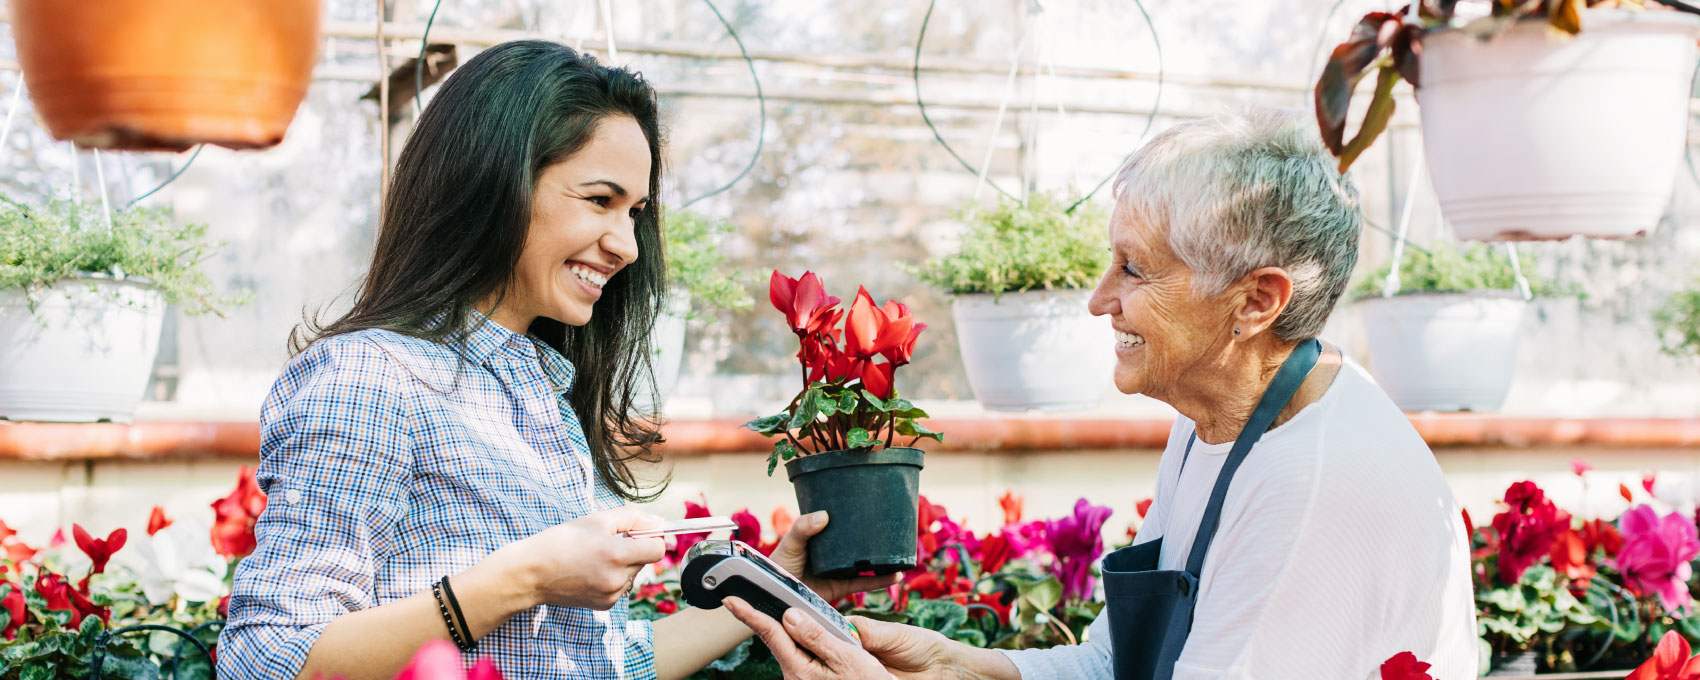 young woman buying plant at flower shop from senior cashier